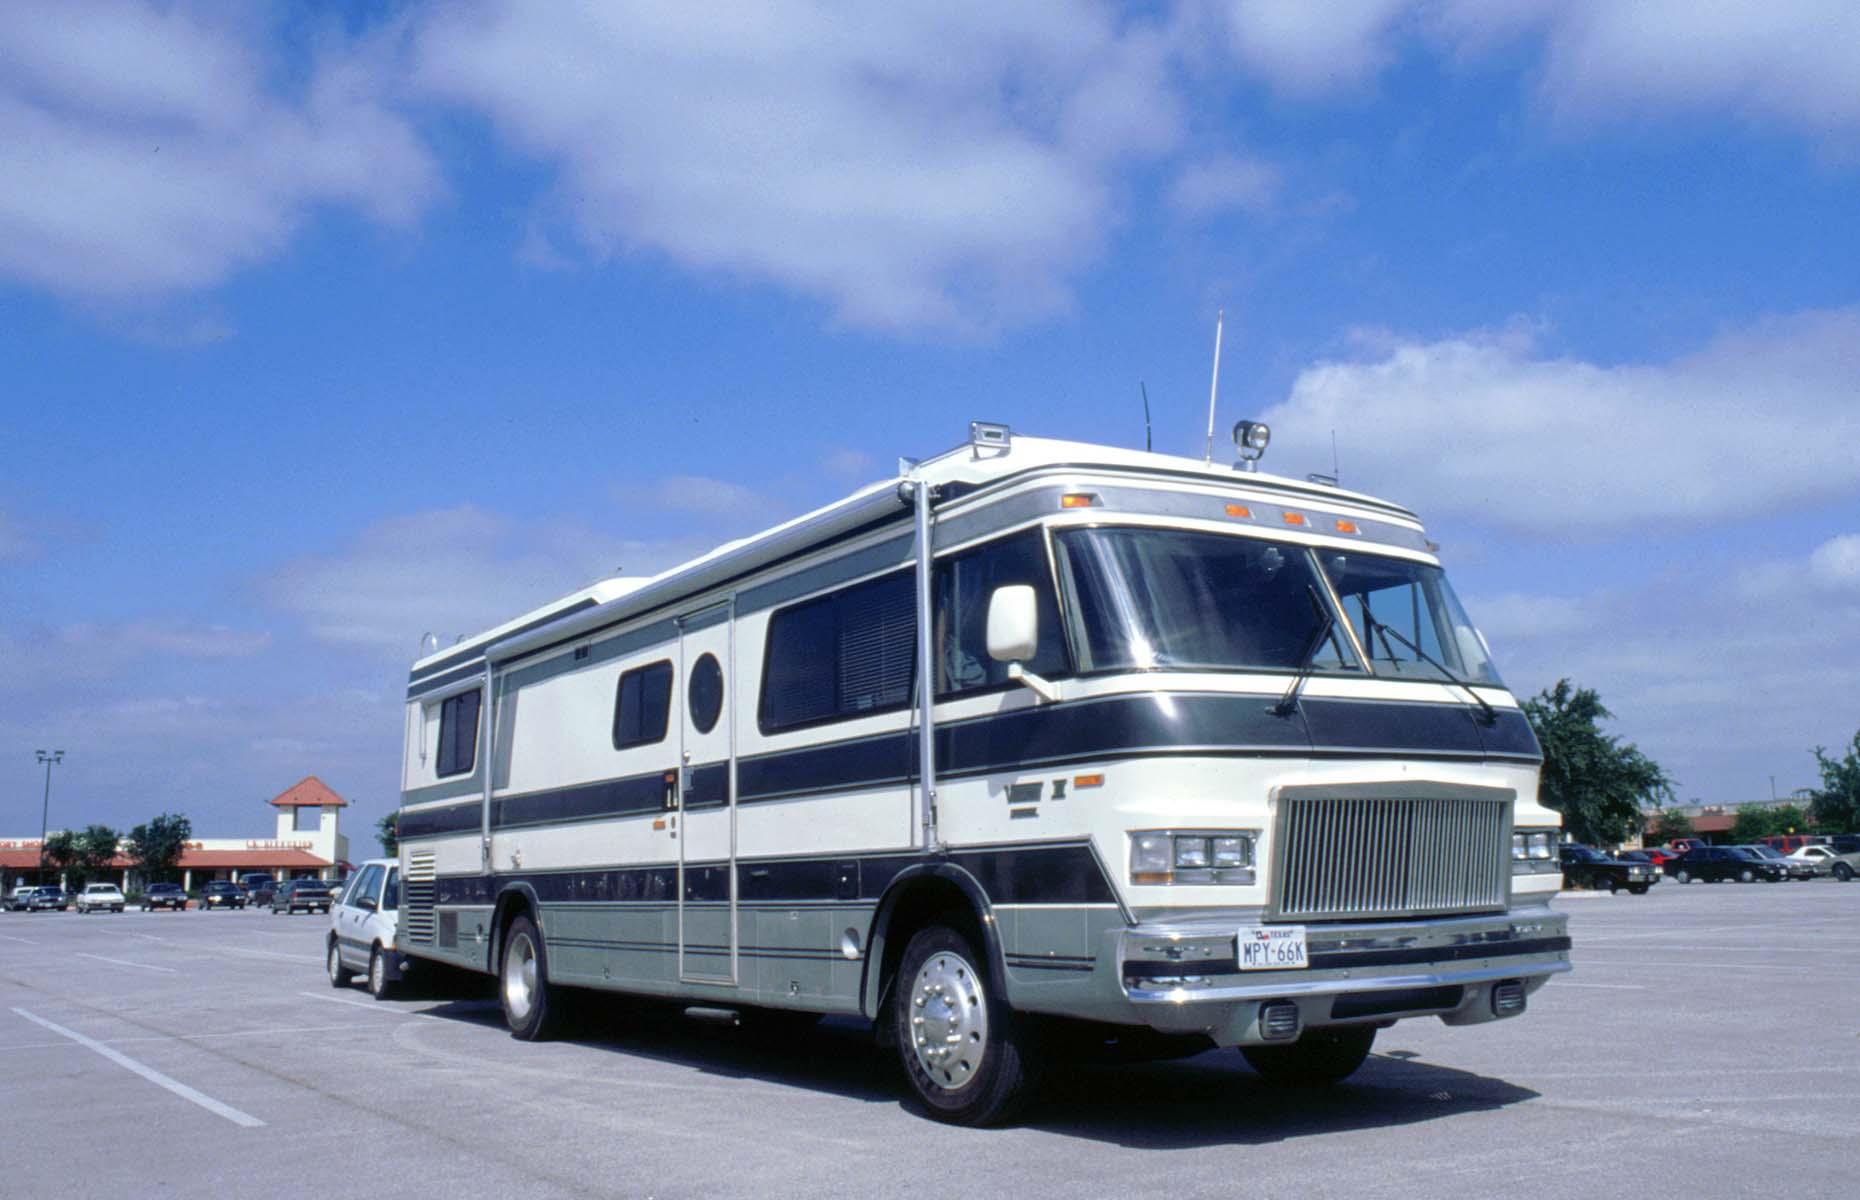 <p>Despite the increased availability and affordability of flying across the States, many families still defaulted to a RV or camping trip through the Noughties. The tragic events of 9/11 in 2001 also led to an increased interest in RV vacations, <a href="https://www.lonelyplanet.com/articles/rv-travel-trend">according to industry experts</a>. This classic American RV is parked up in a lot in Florida in the year 2000.</p>  <p><strong><a href="https://www.loveexploring.com/galleries/94956/what-family-holidays-looked-like-the-decade-you-were-born">Here's what family vacations looked like the decade you were born</a></strong></p>